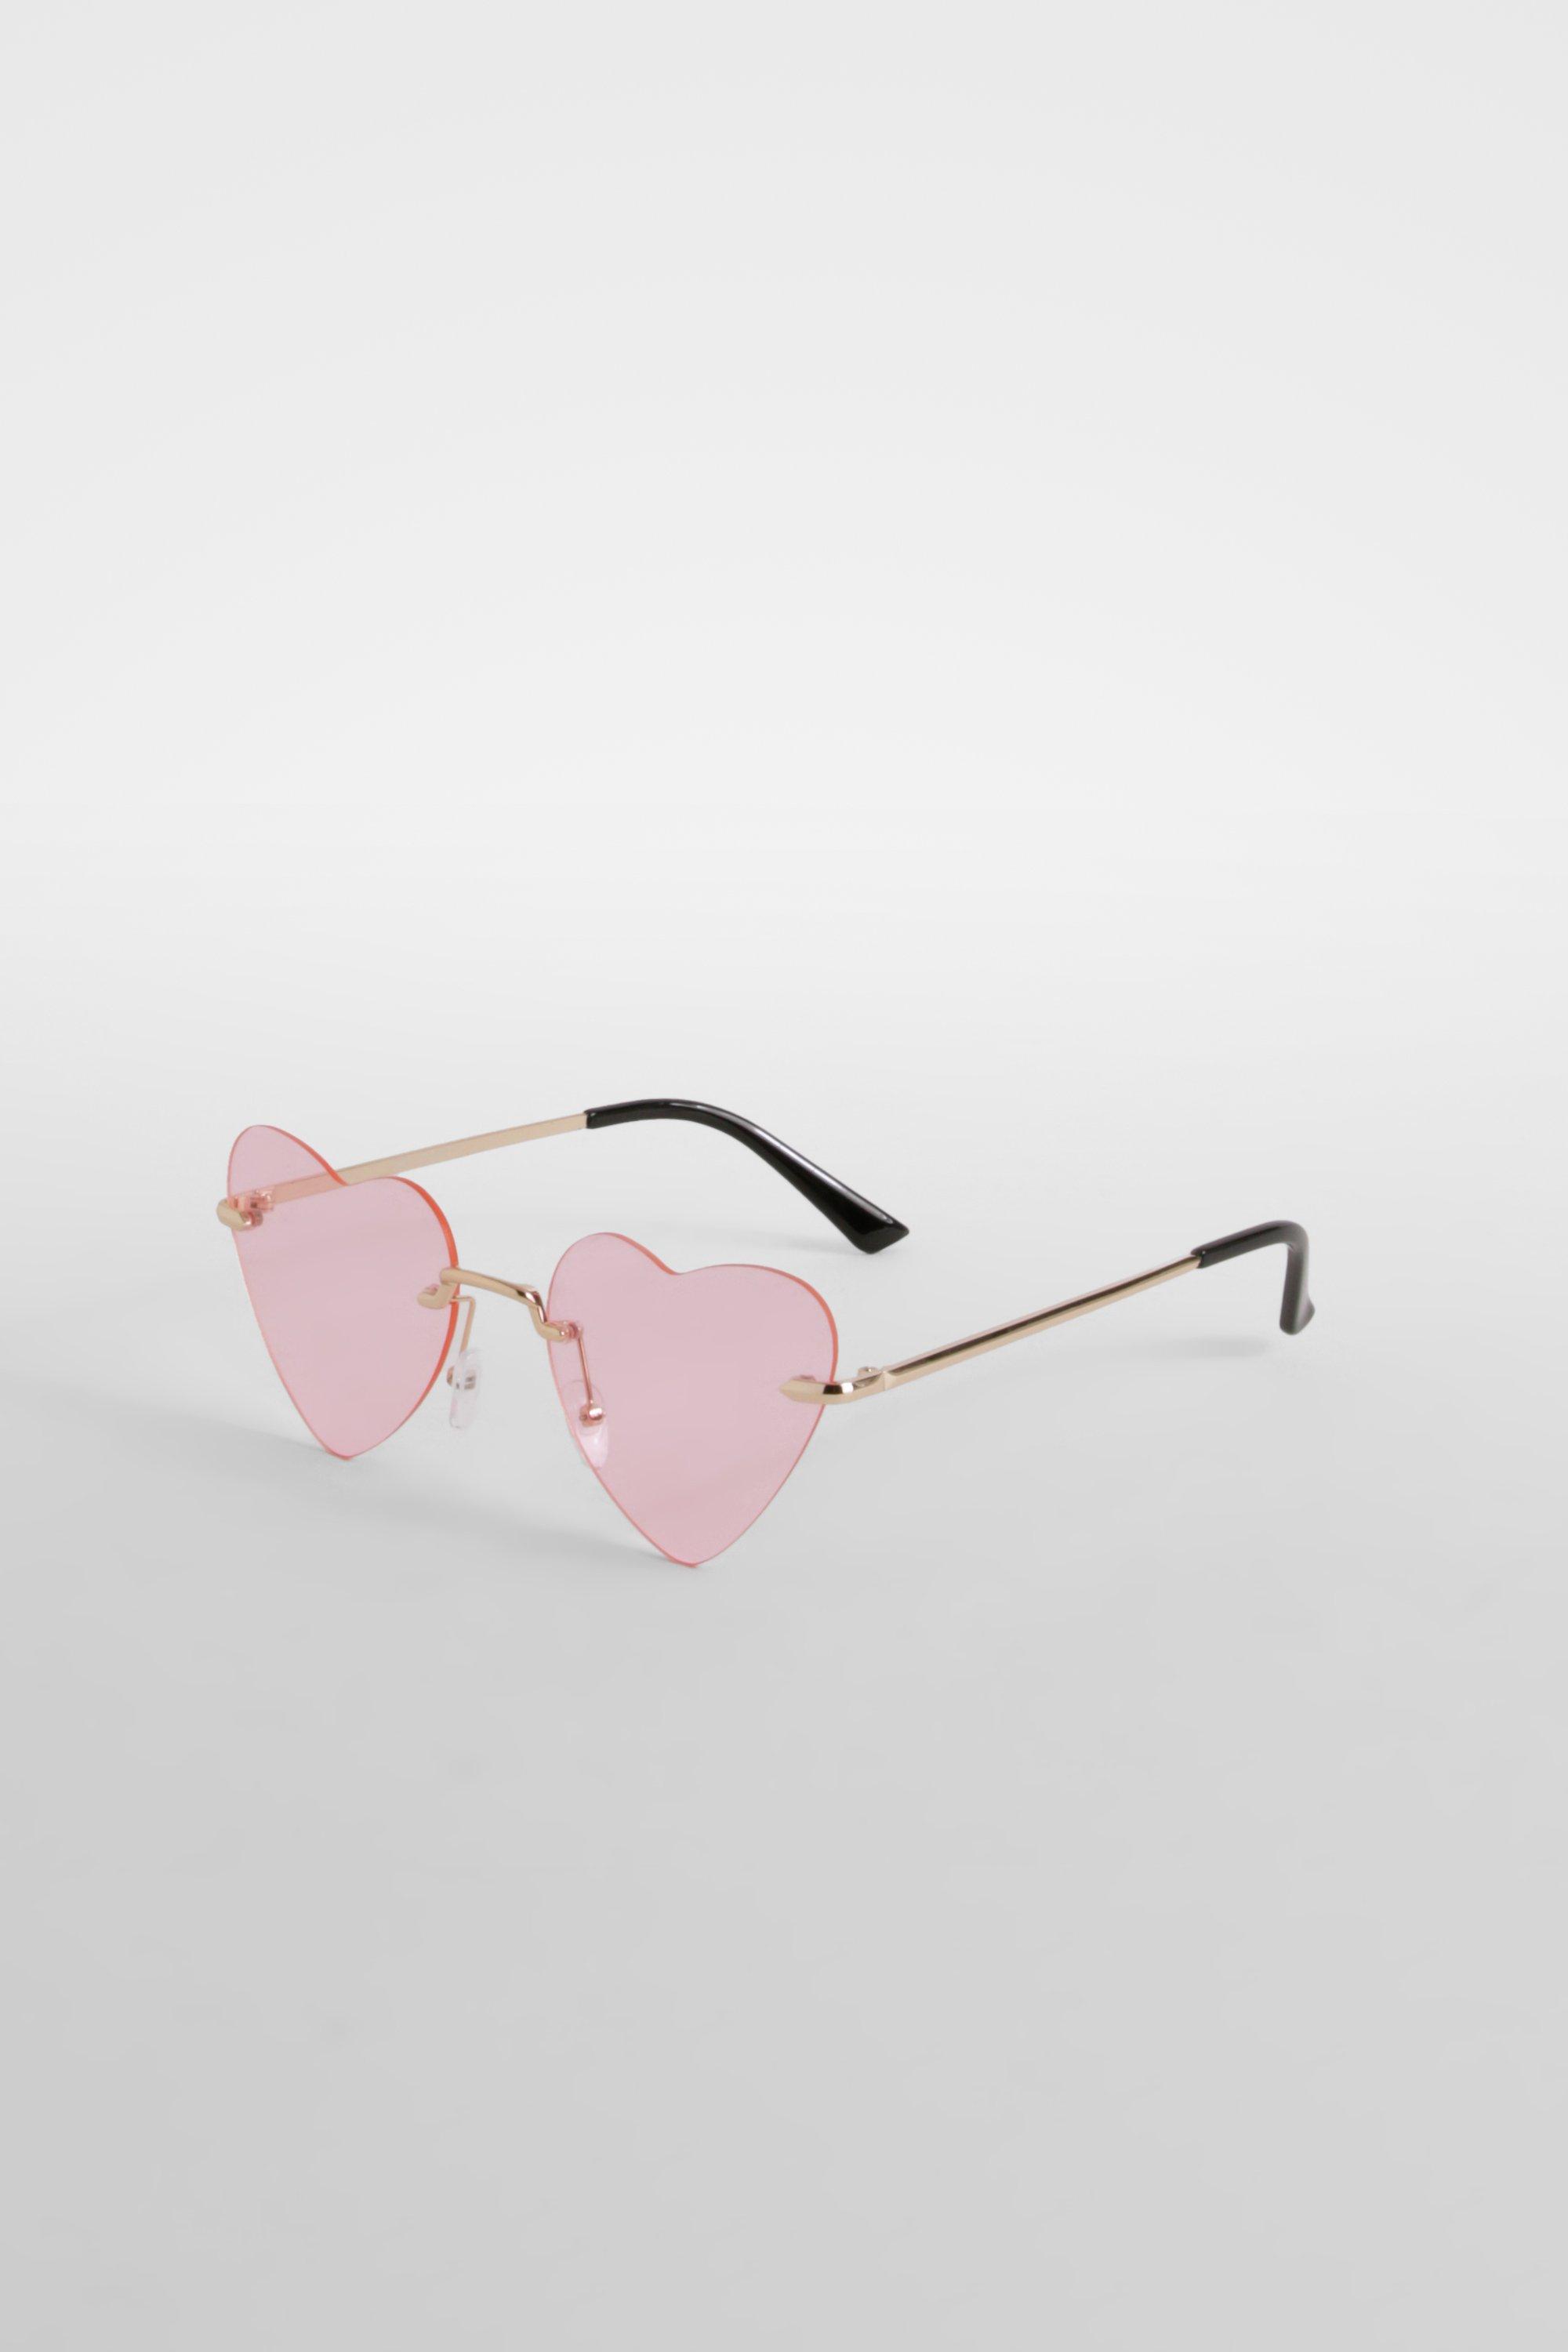 Image of Heart Frame Sunglasses, Pink